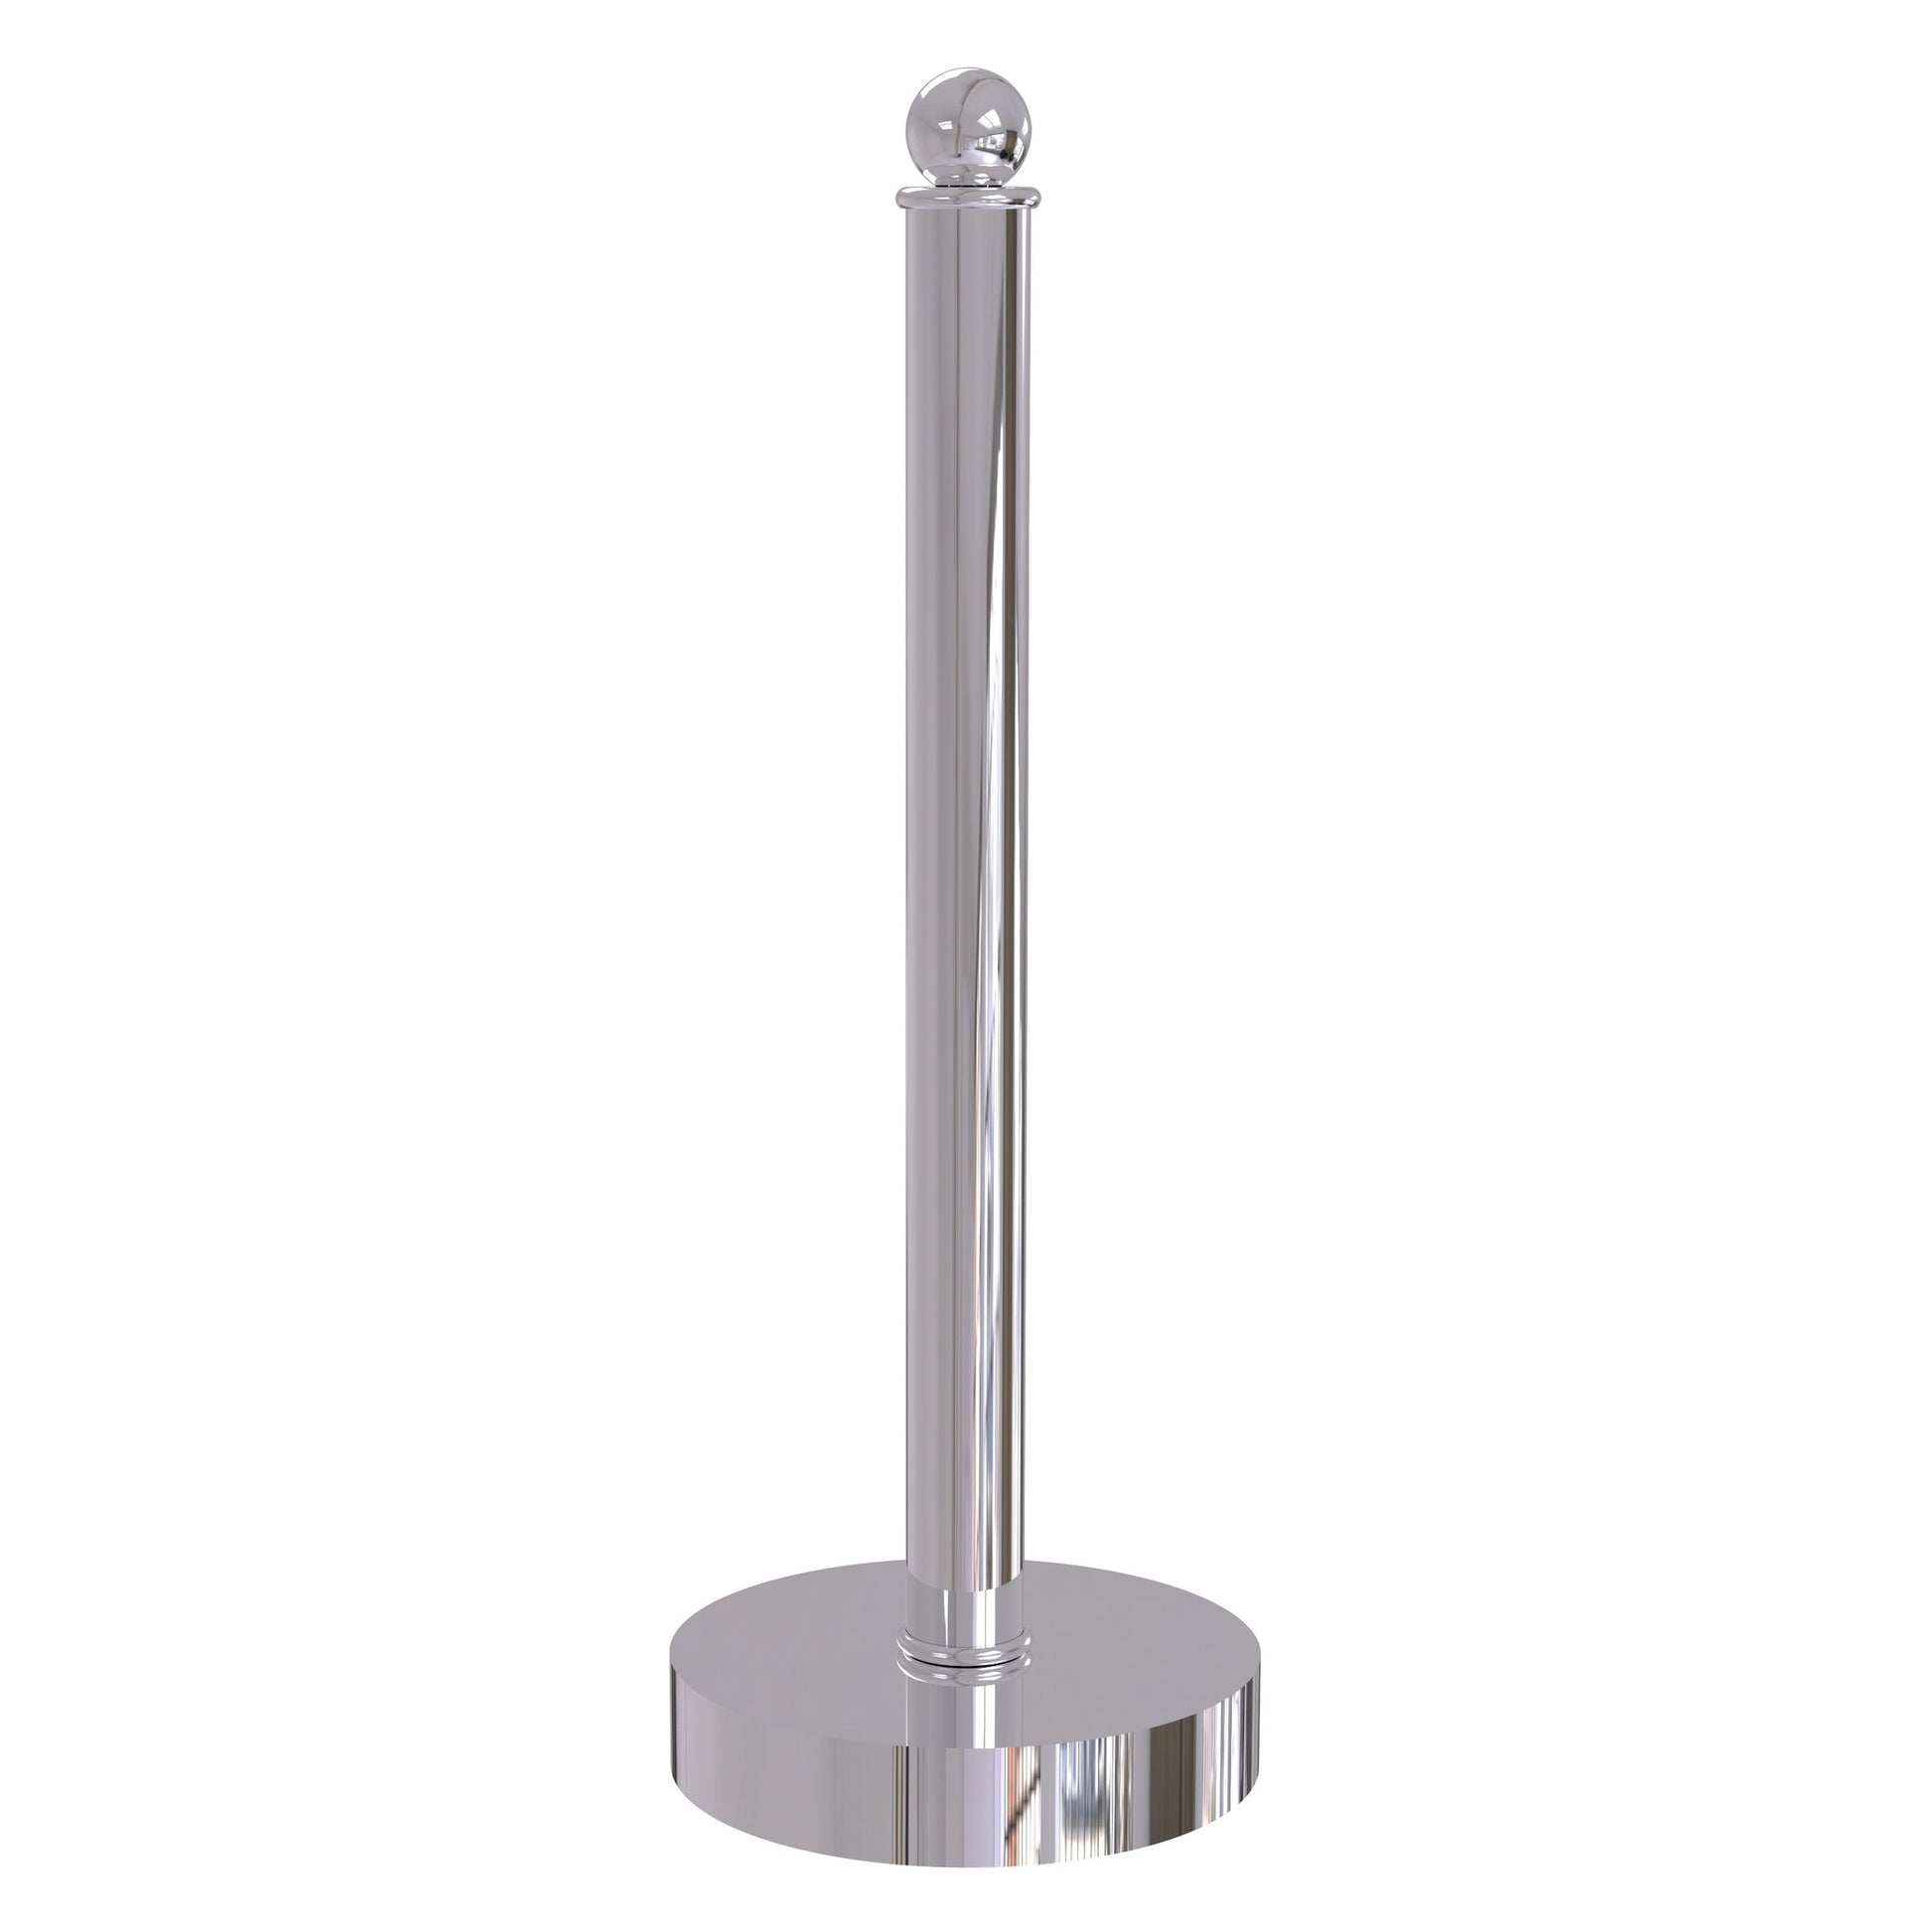 Allied Brass 1051 5" Polished Chrome Solid Brass Paper Towel Holder